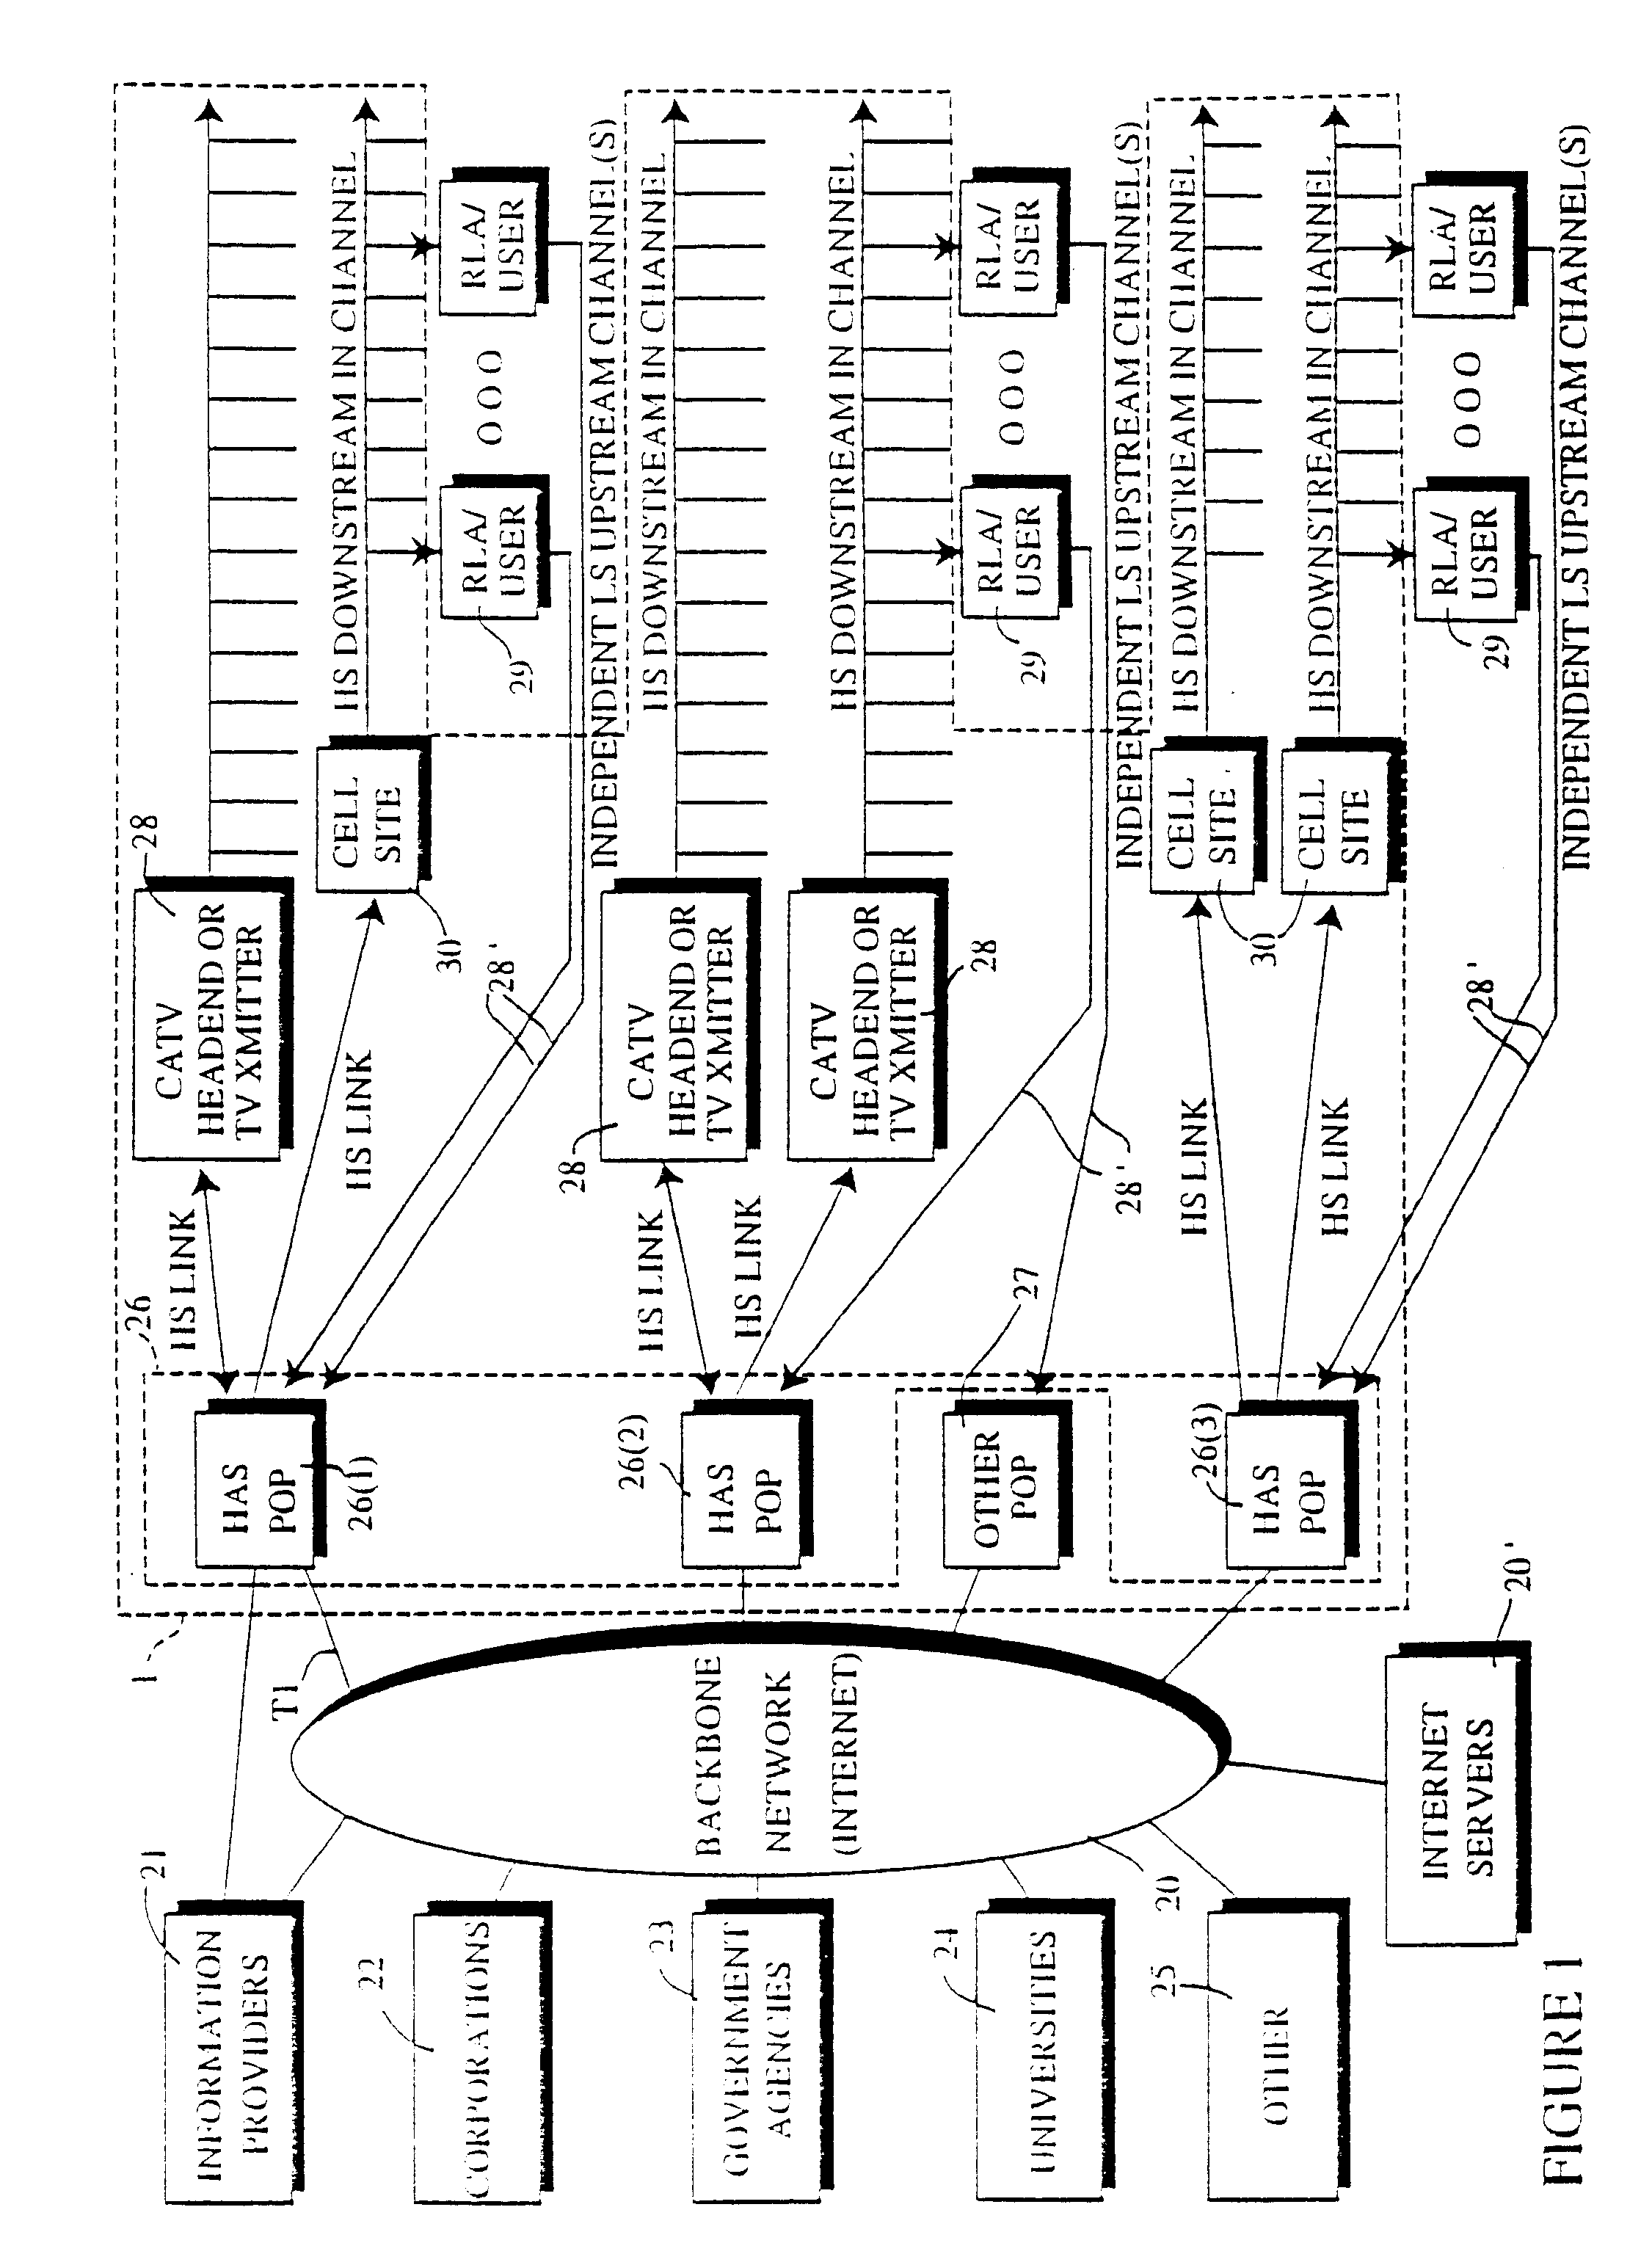 Hybrid access system employing data acknowledgement suppression